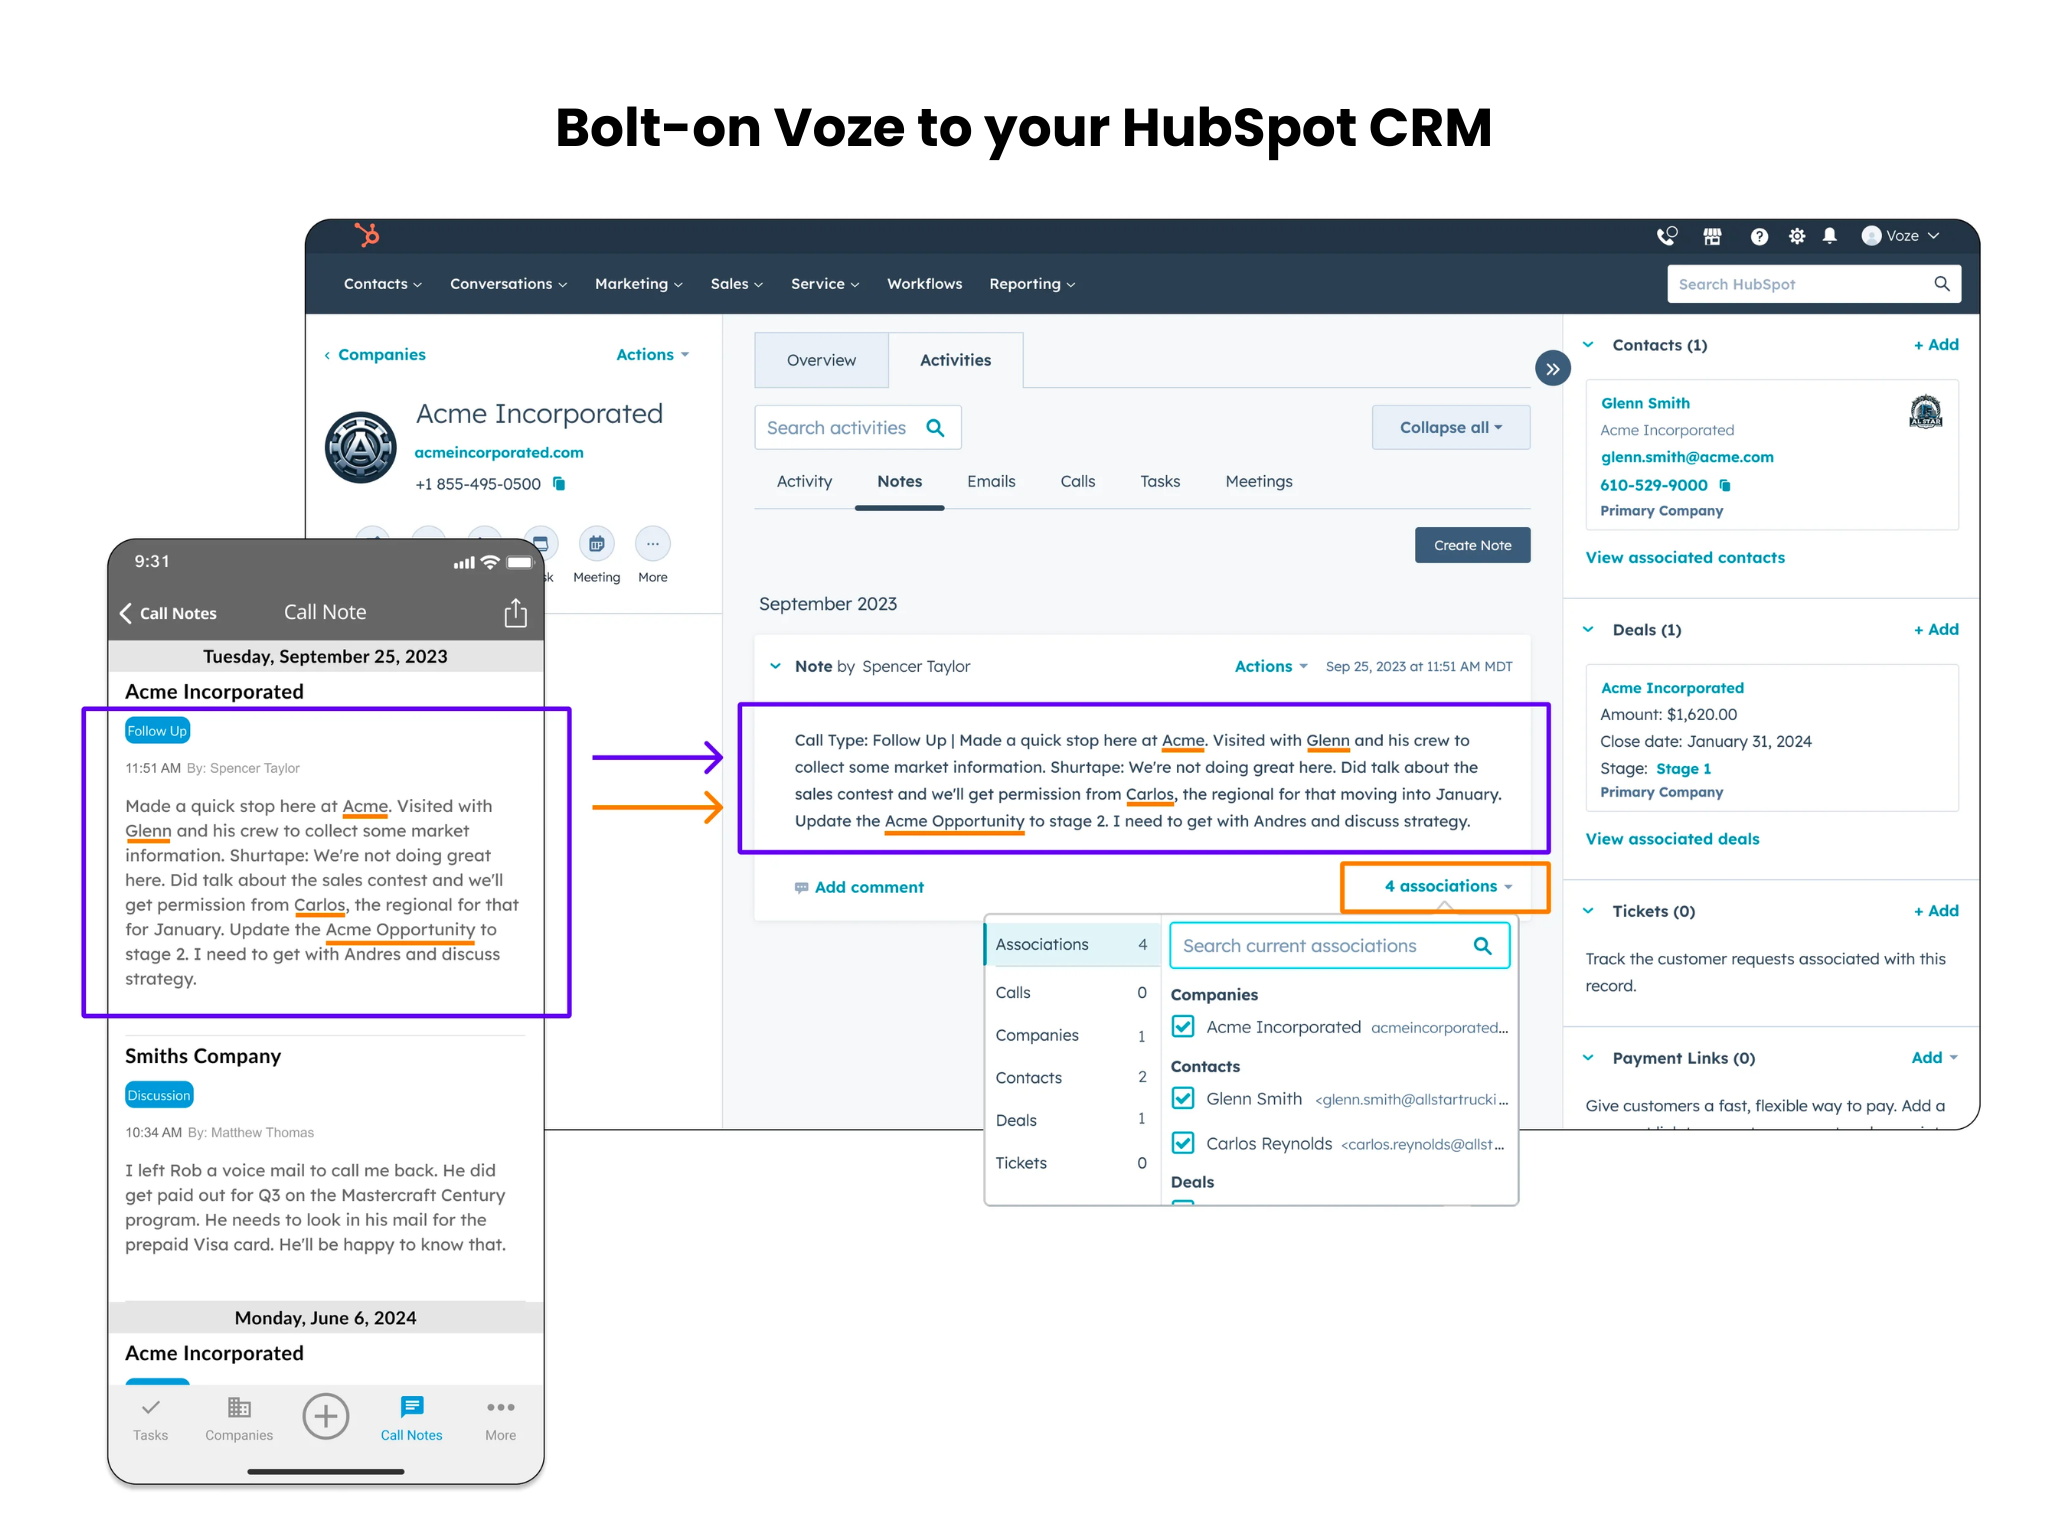 Simple integration with Salesforce. If you are struggling to get good sales data you can add Voze and have their notes sync with Salesforce.